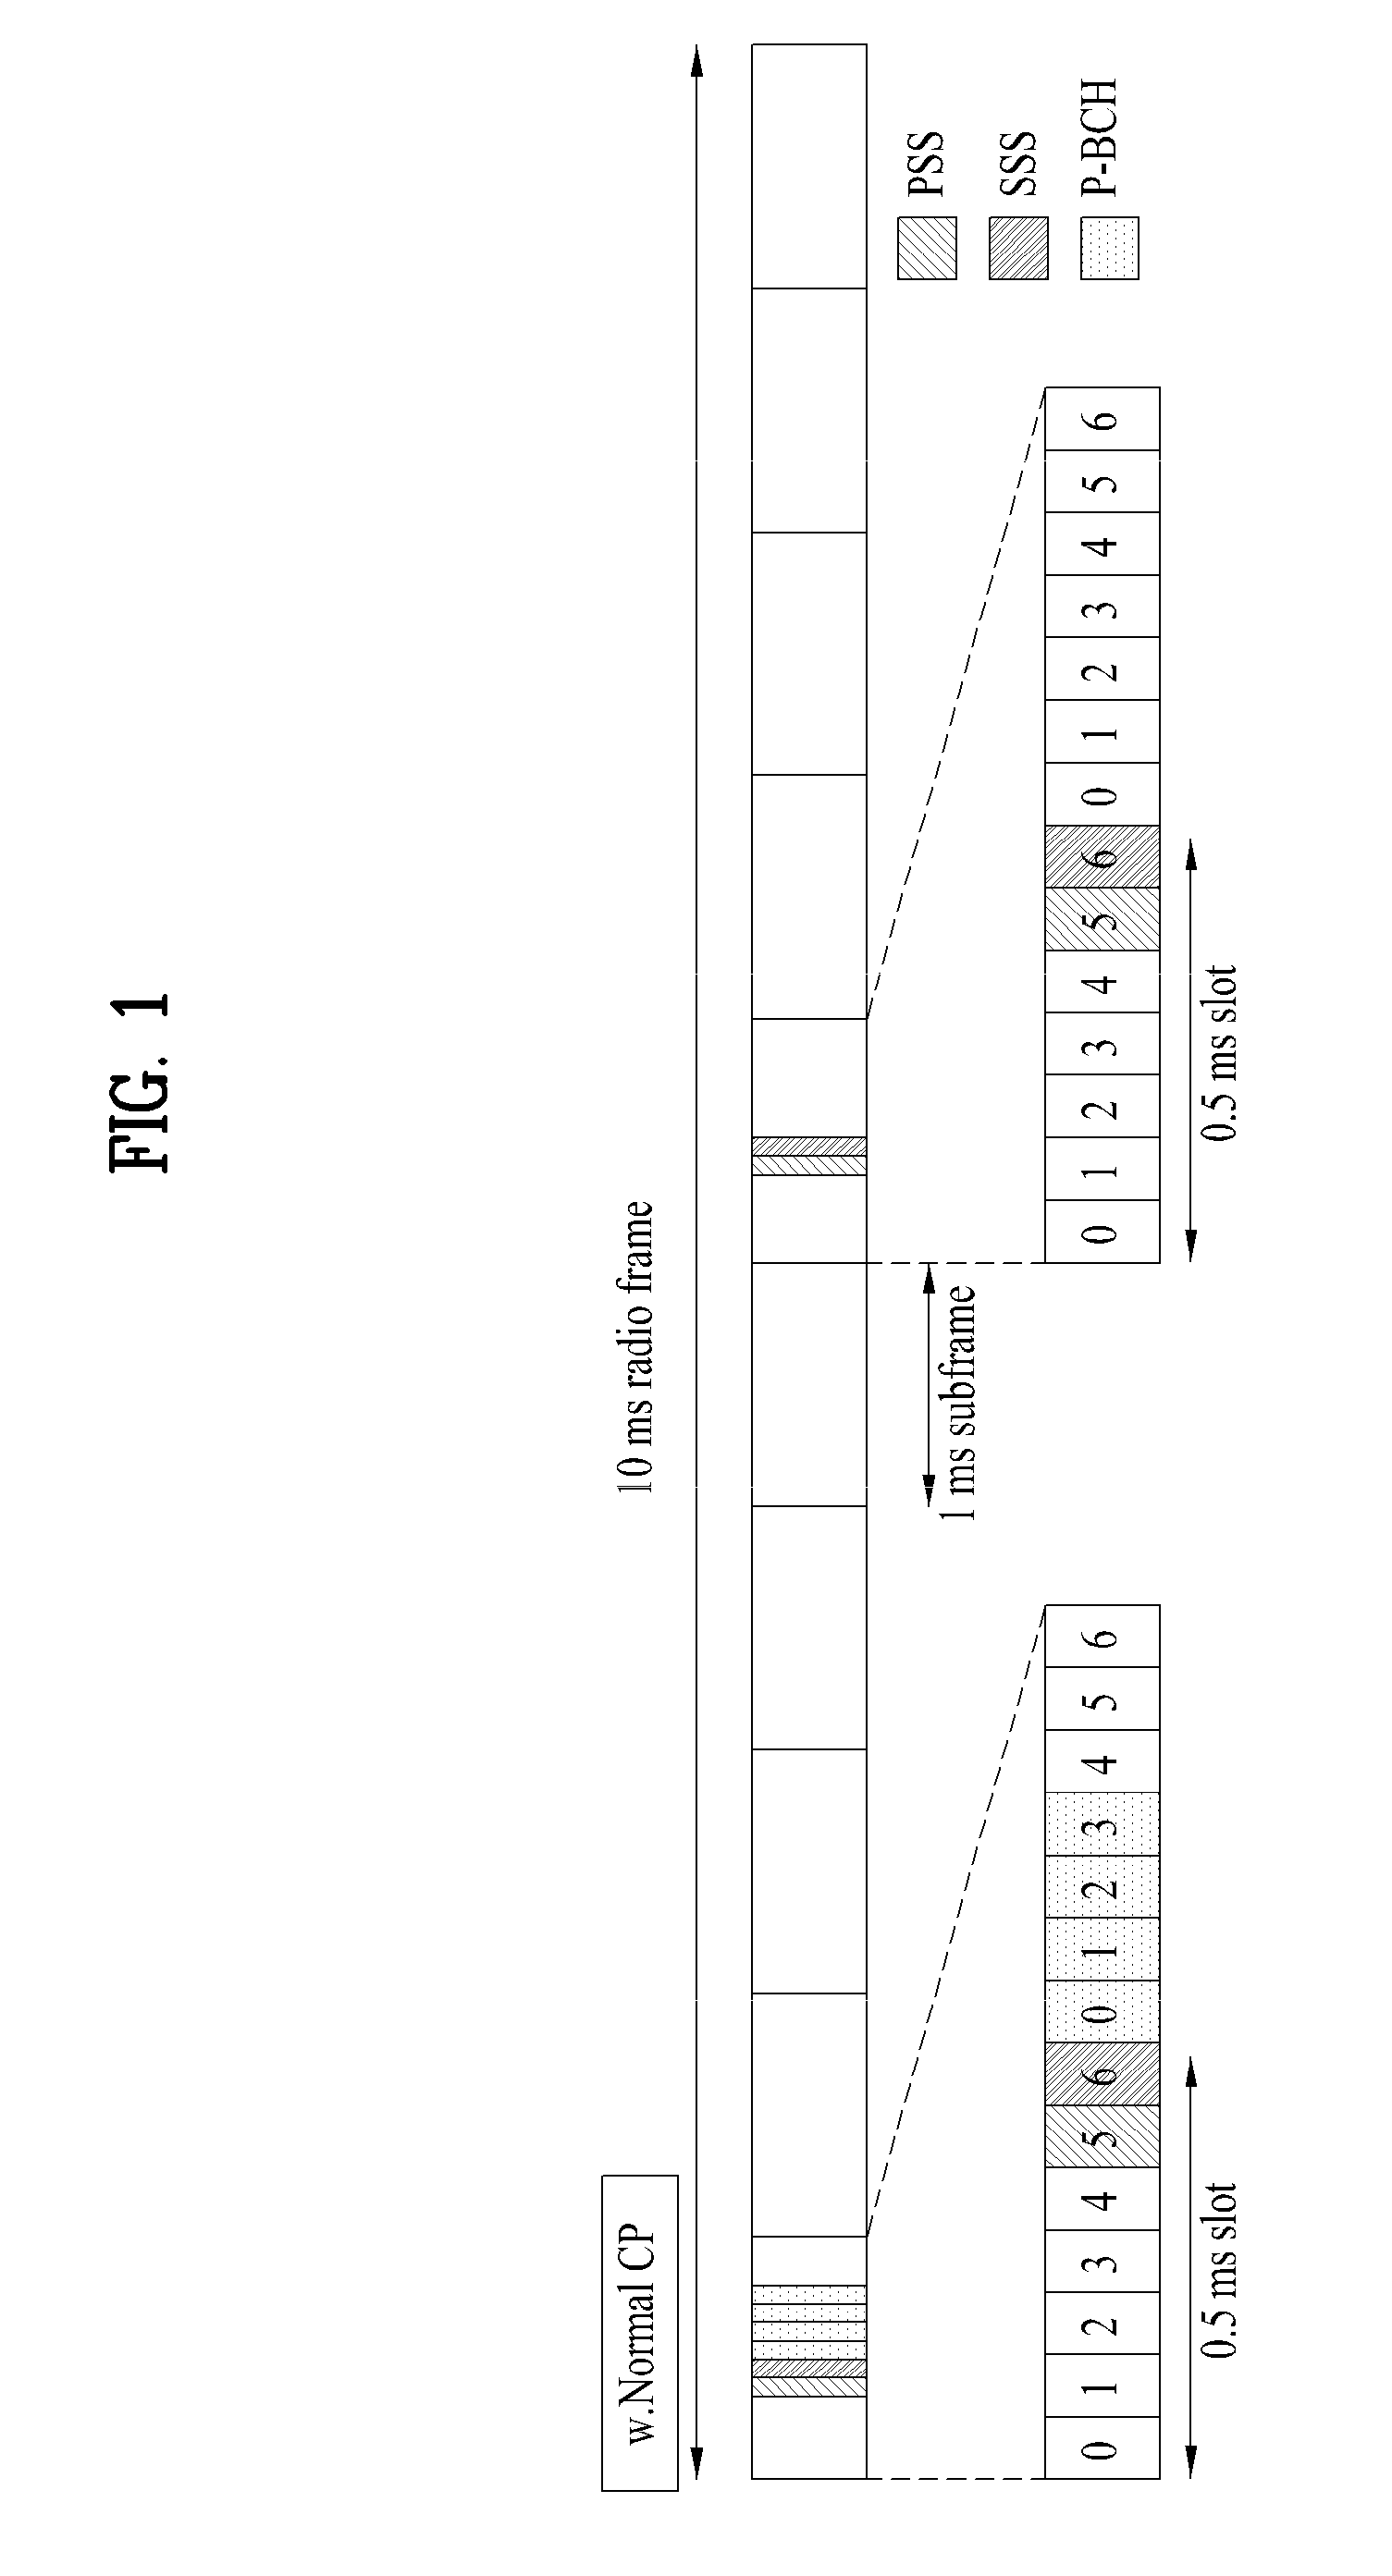 Method for transmitting physical layer id information